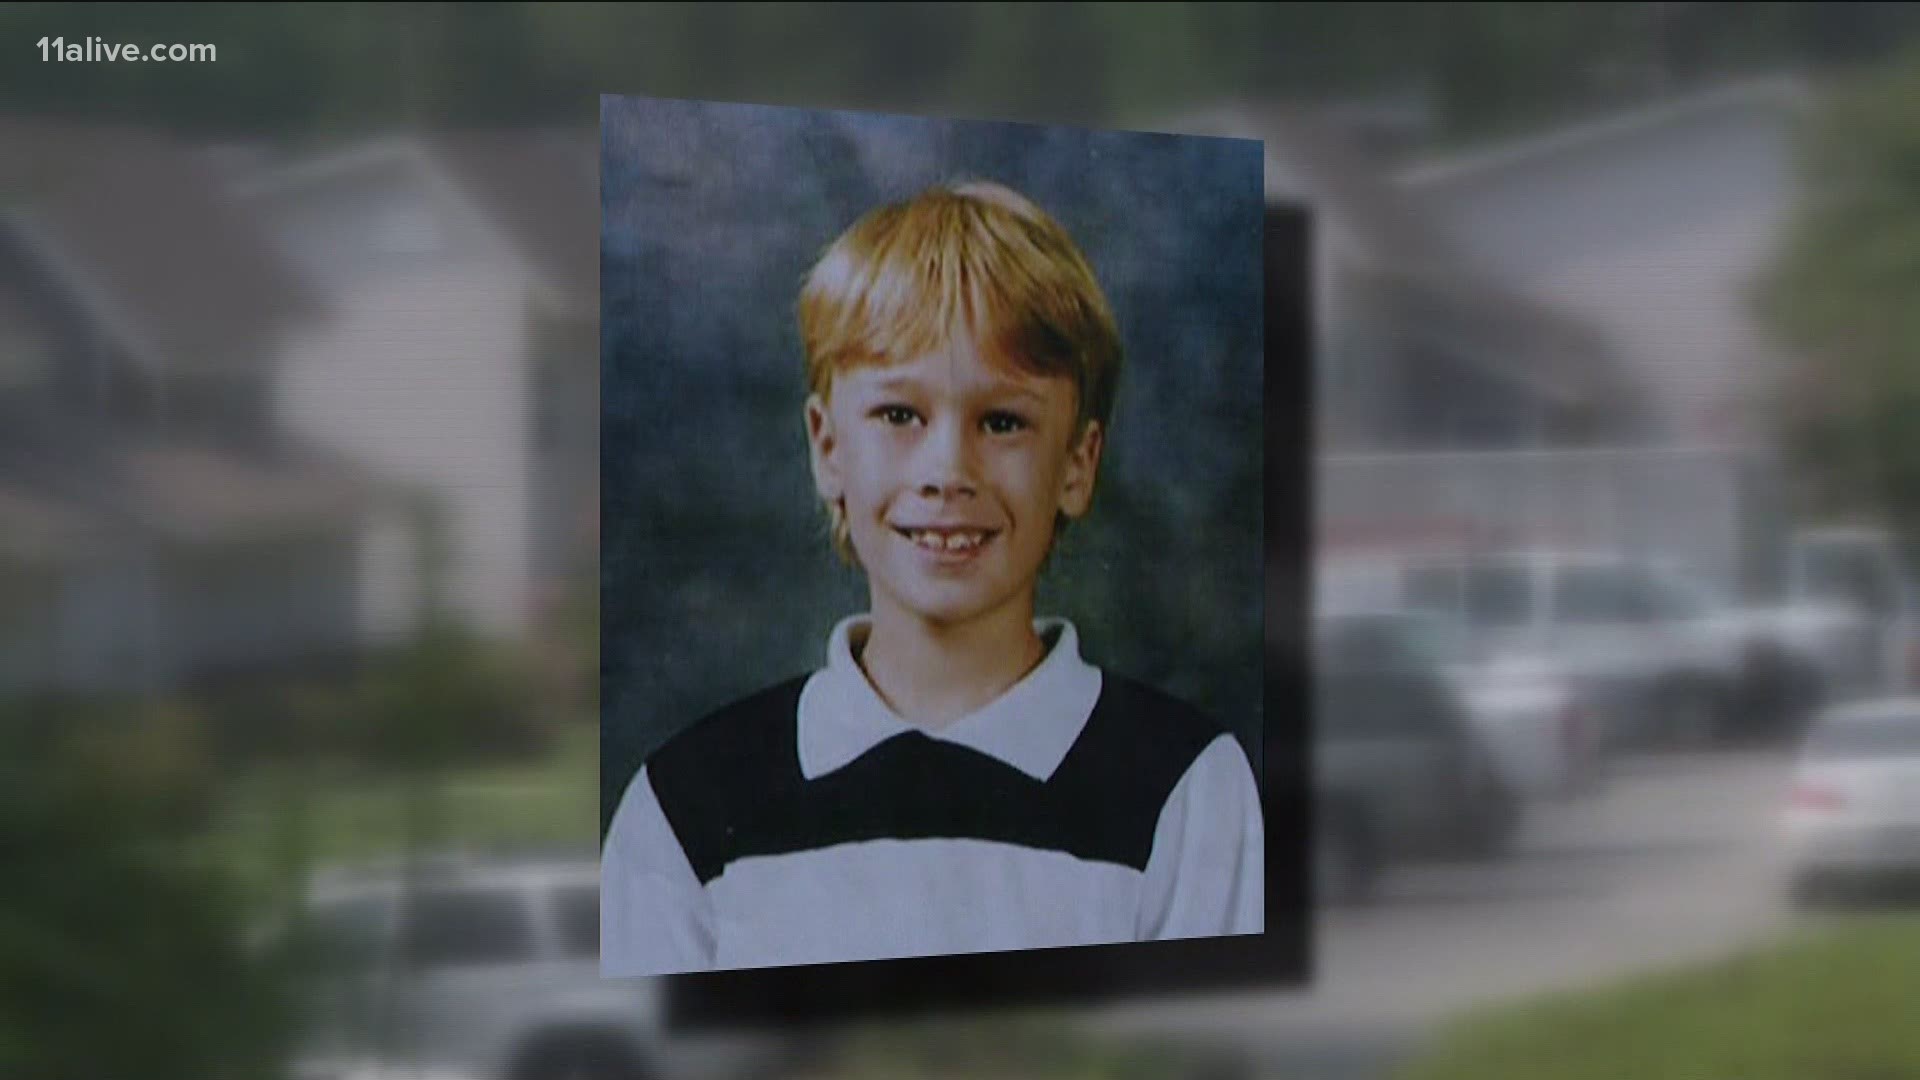 The aunt of an 8-year-old boy who went missing and was found dead over 30 years ago said their family is "forever indebted" to the officials who made an arrest.